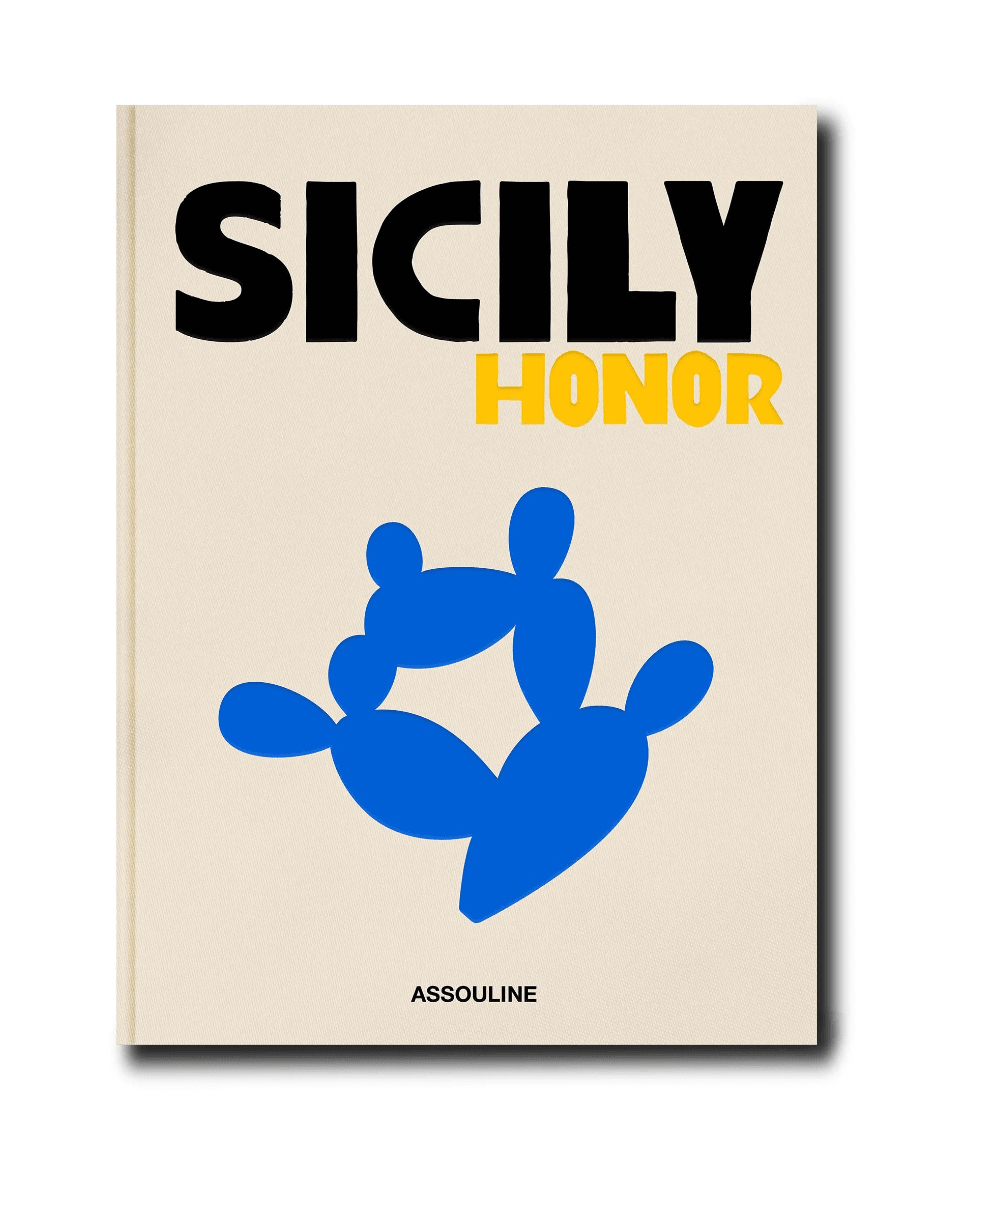 Sicily Honor Coffee Table Book by Assouline - Haven